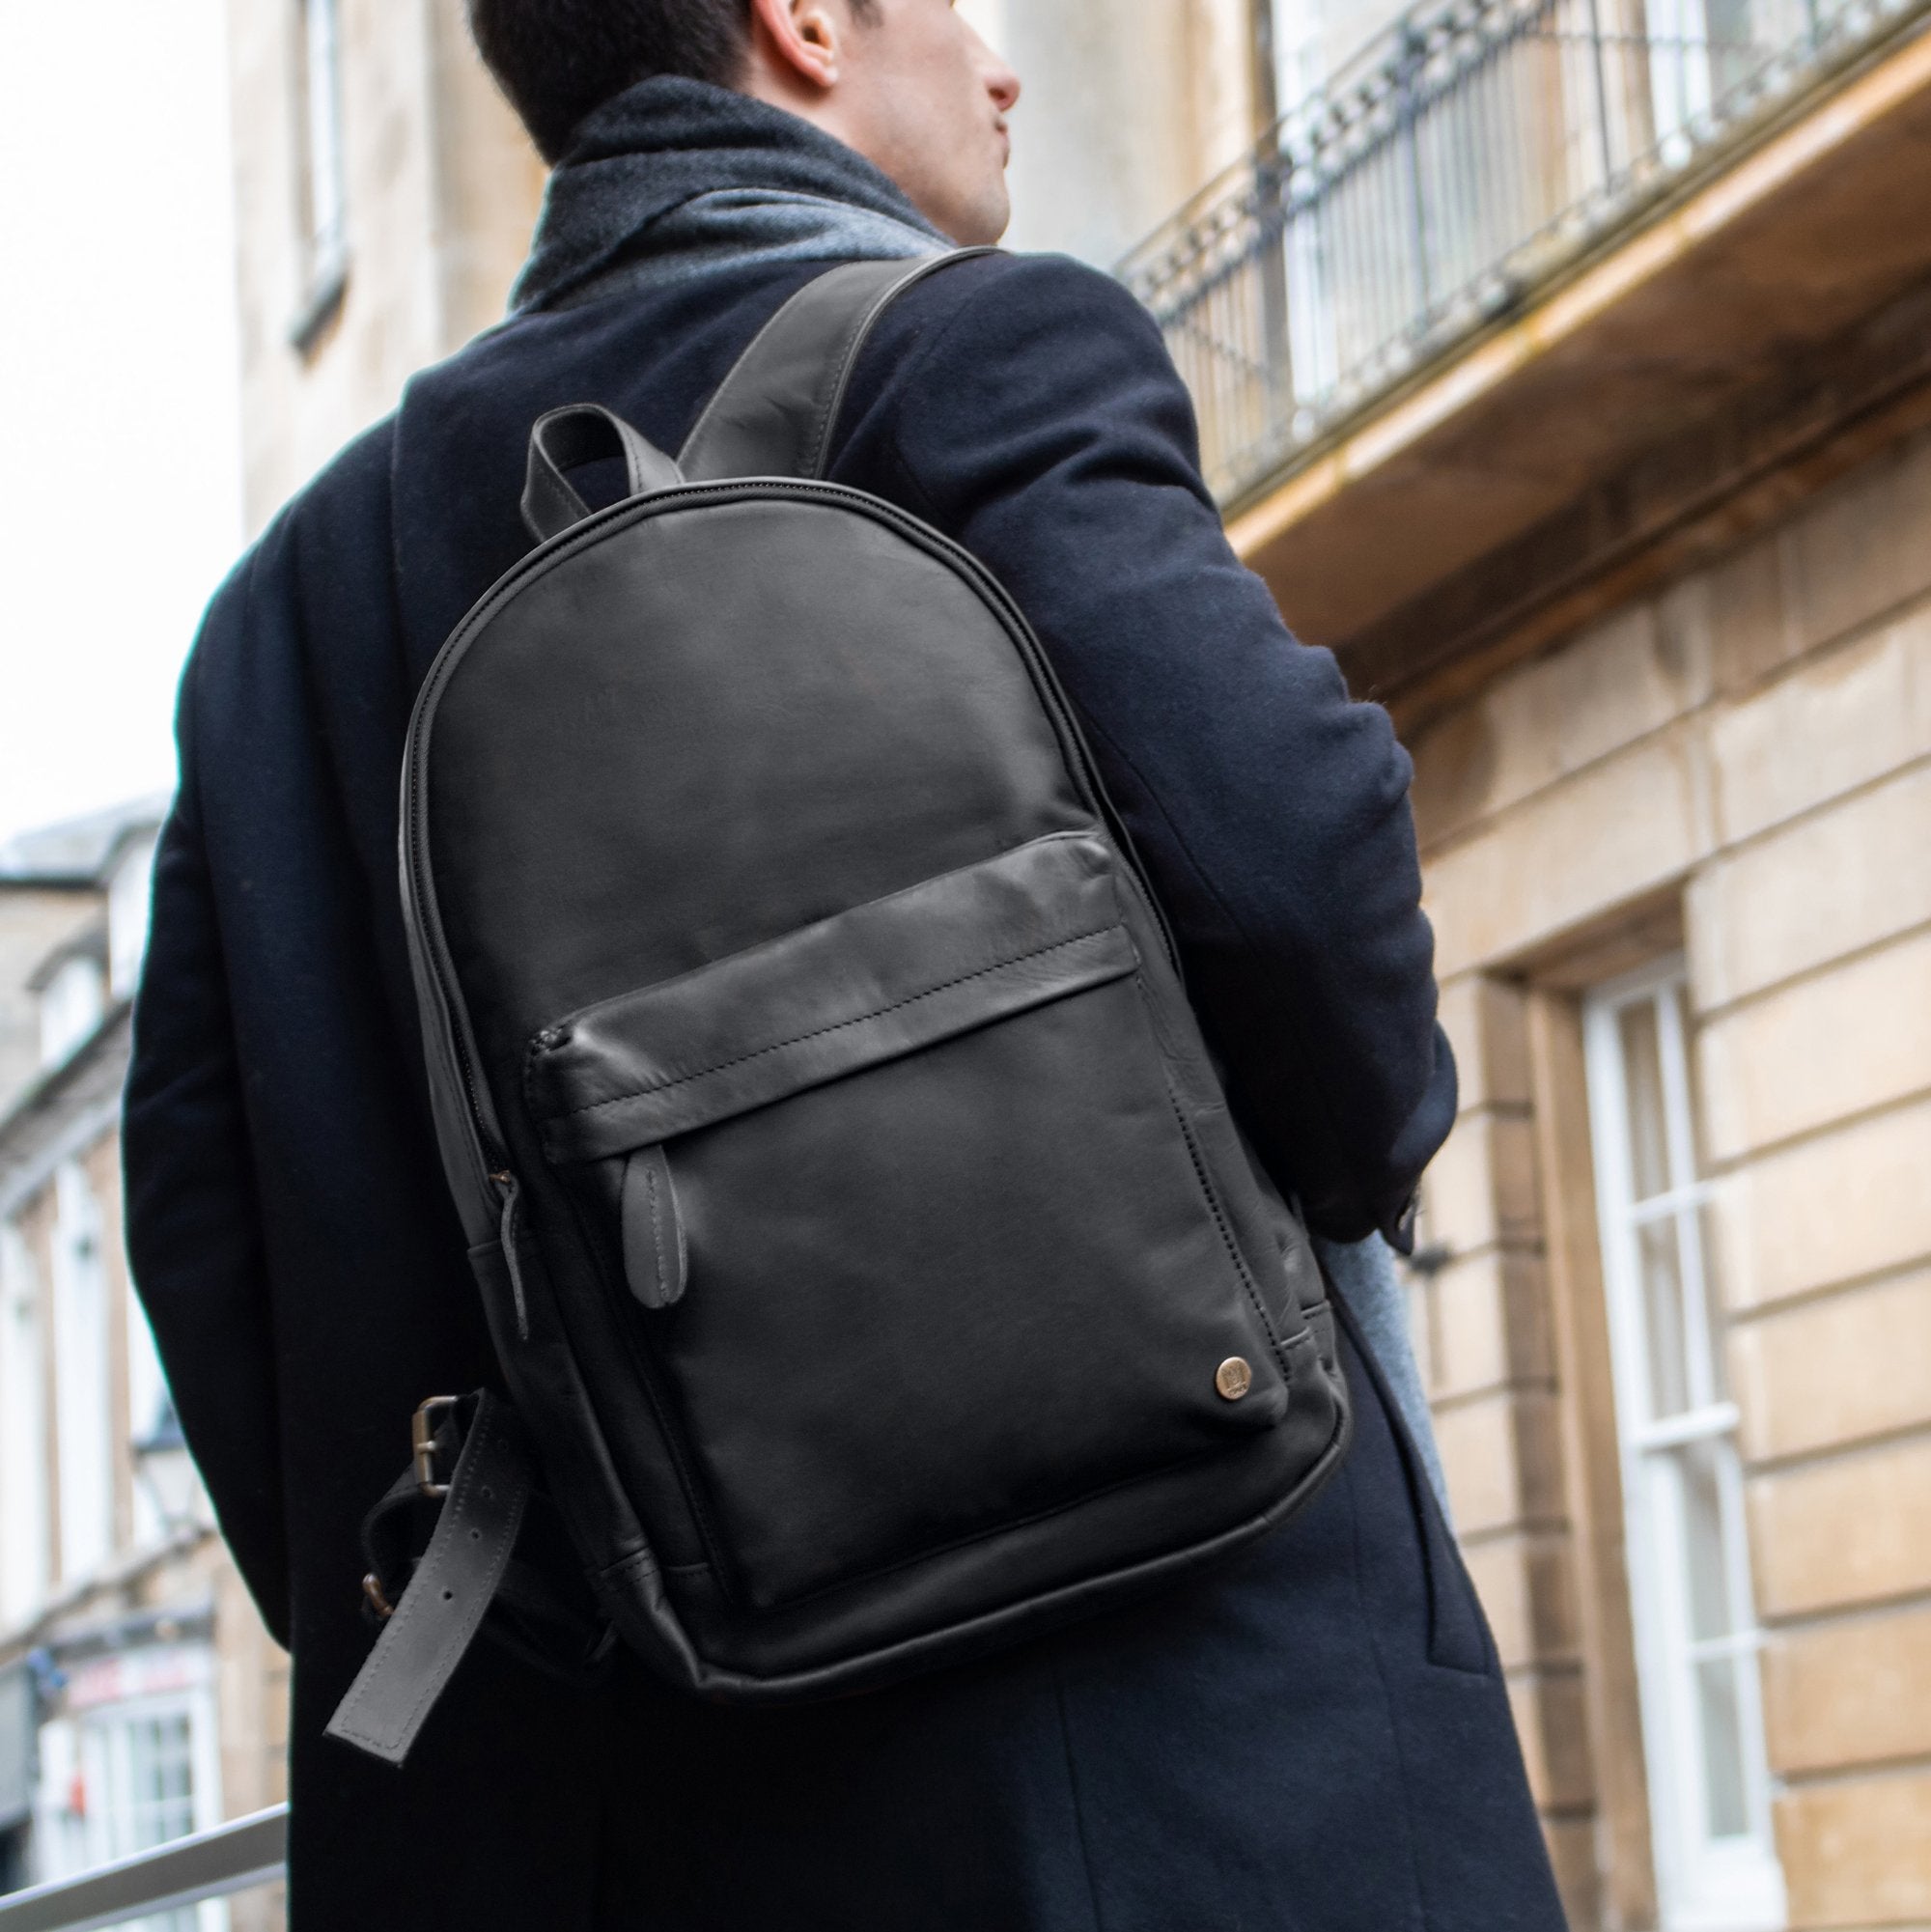 Classic Black Leather Backpack for Work or College | Back to School ...